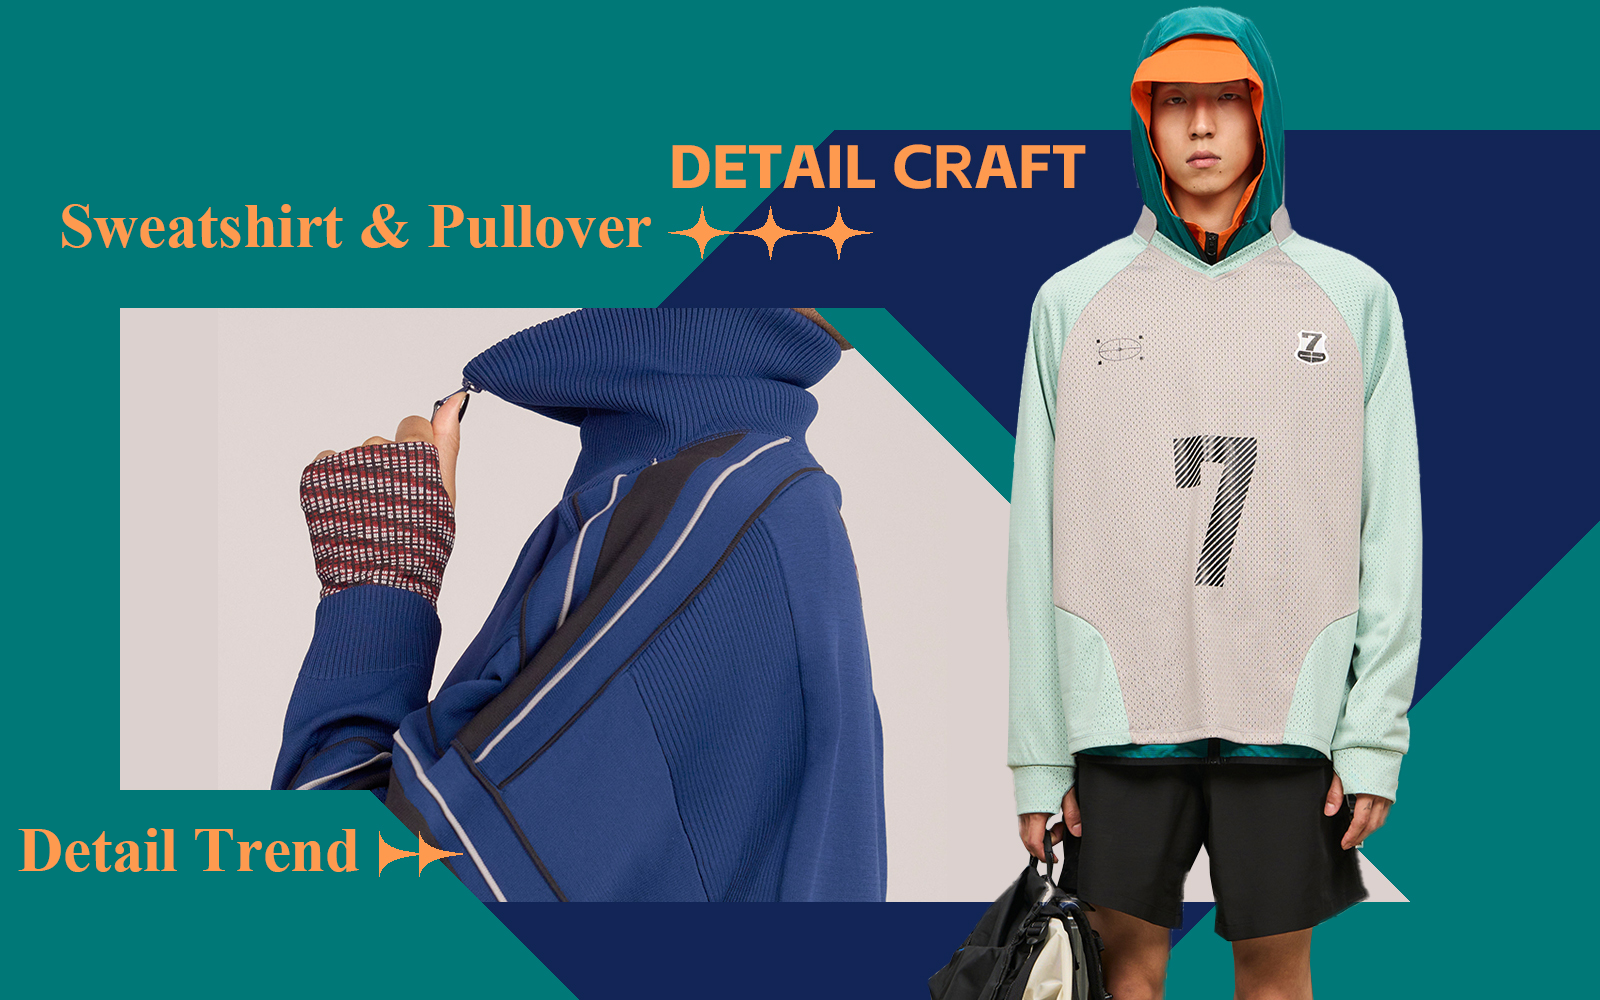 The Detail & Craft Trend for Sporty Sweatshirt & Pullover